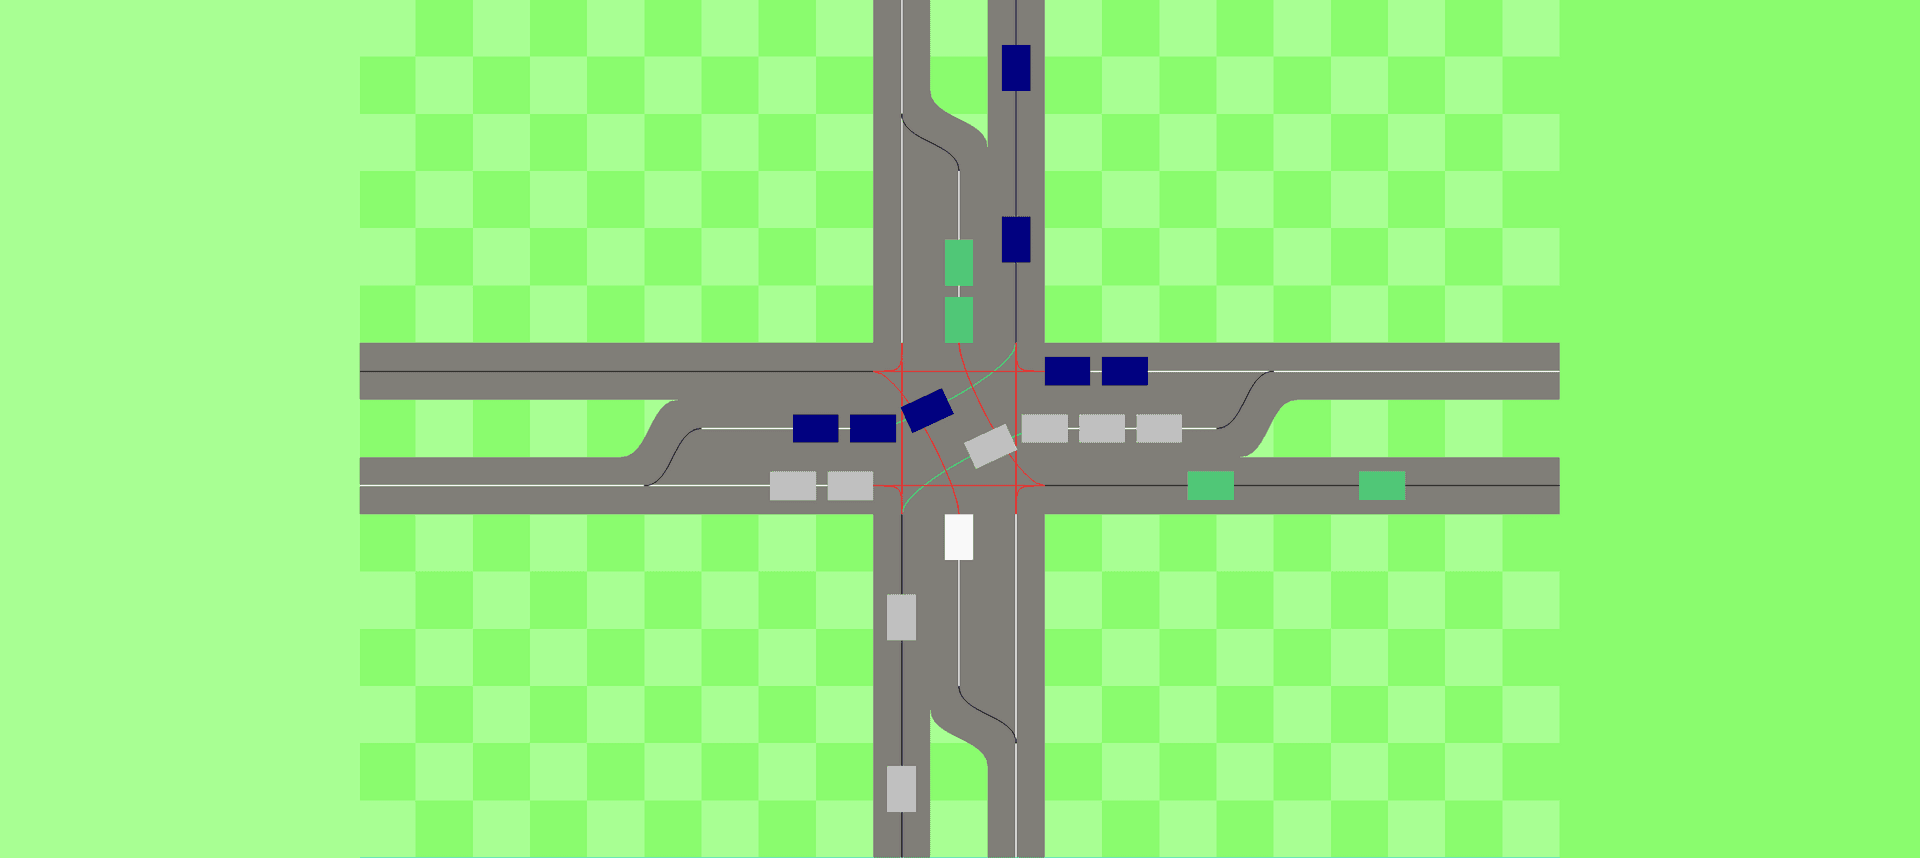 A picture of an intersection in a simulated software environment